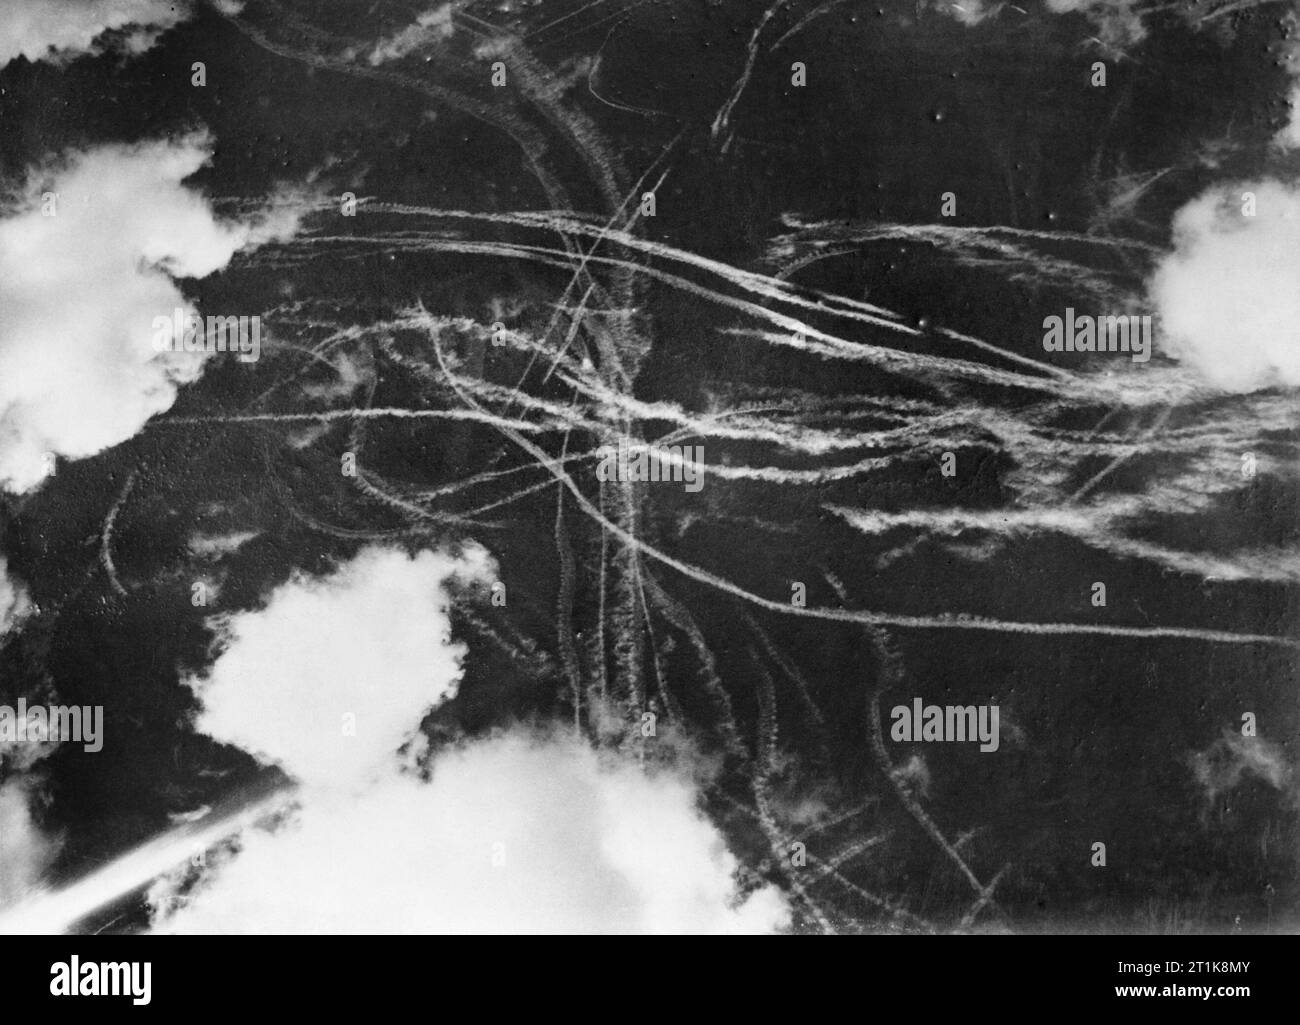 The Battle of Britain 1940 Operations: Pattern of condensation trails left by British and German aircraft after a dog fight. Stock Photo